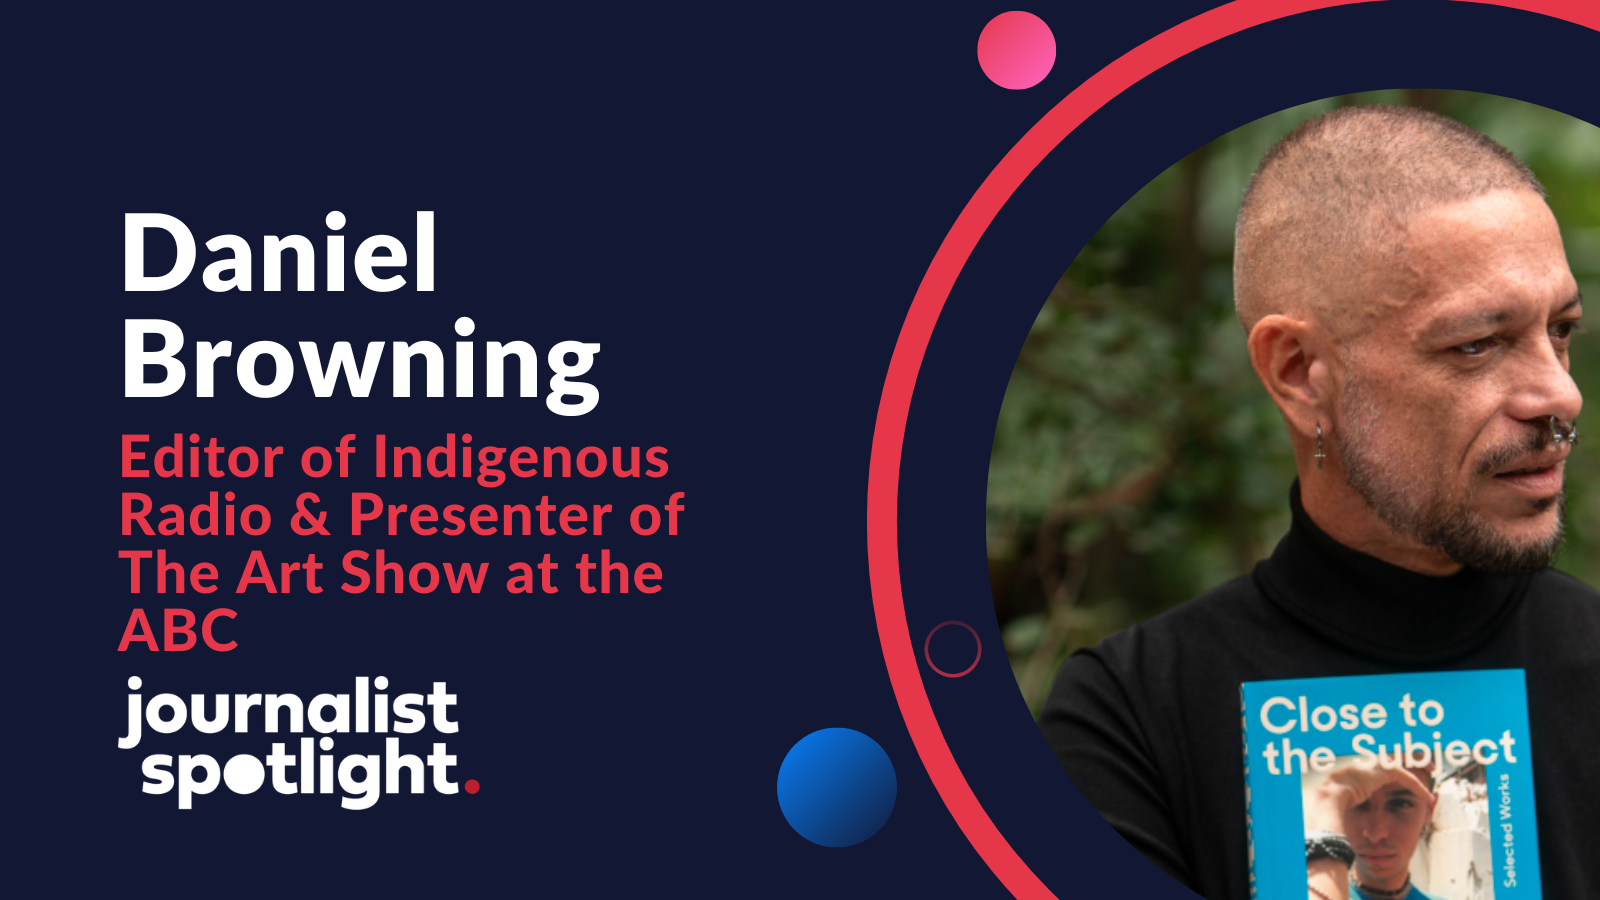 Journalist Spotlight | Interview with Daniel Browning, Editor of Indigenous Radio & Presenter of The Art Show at the ABC